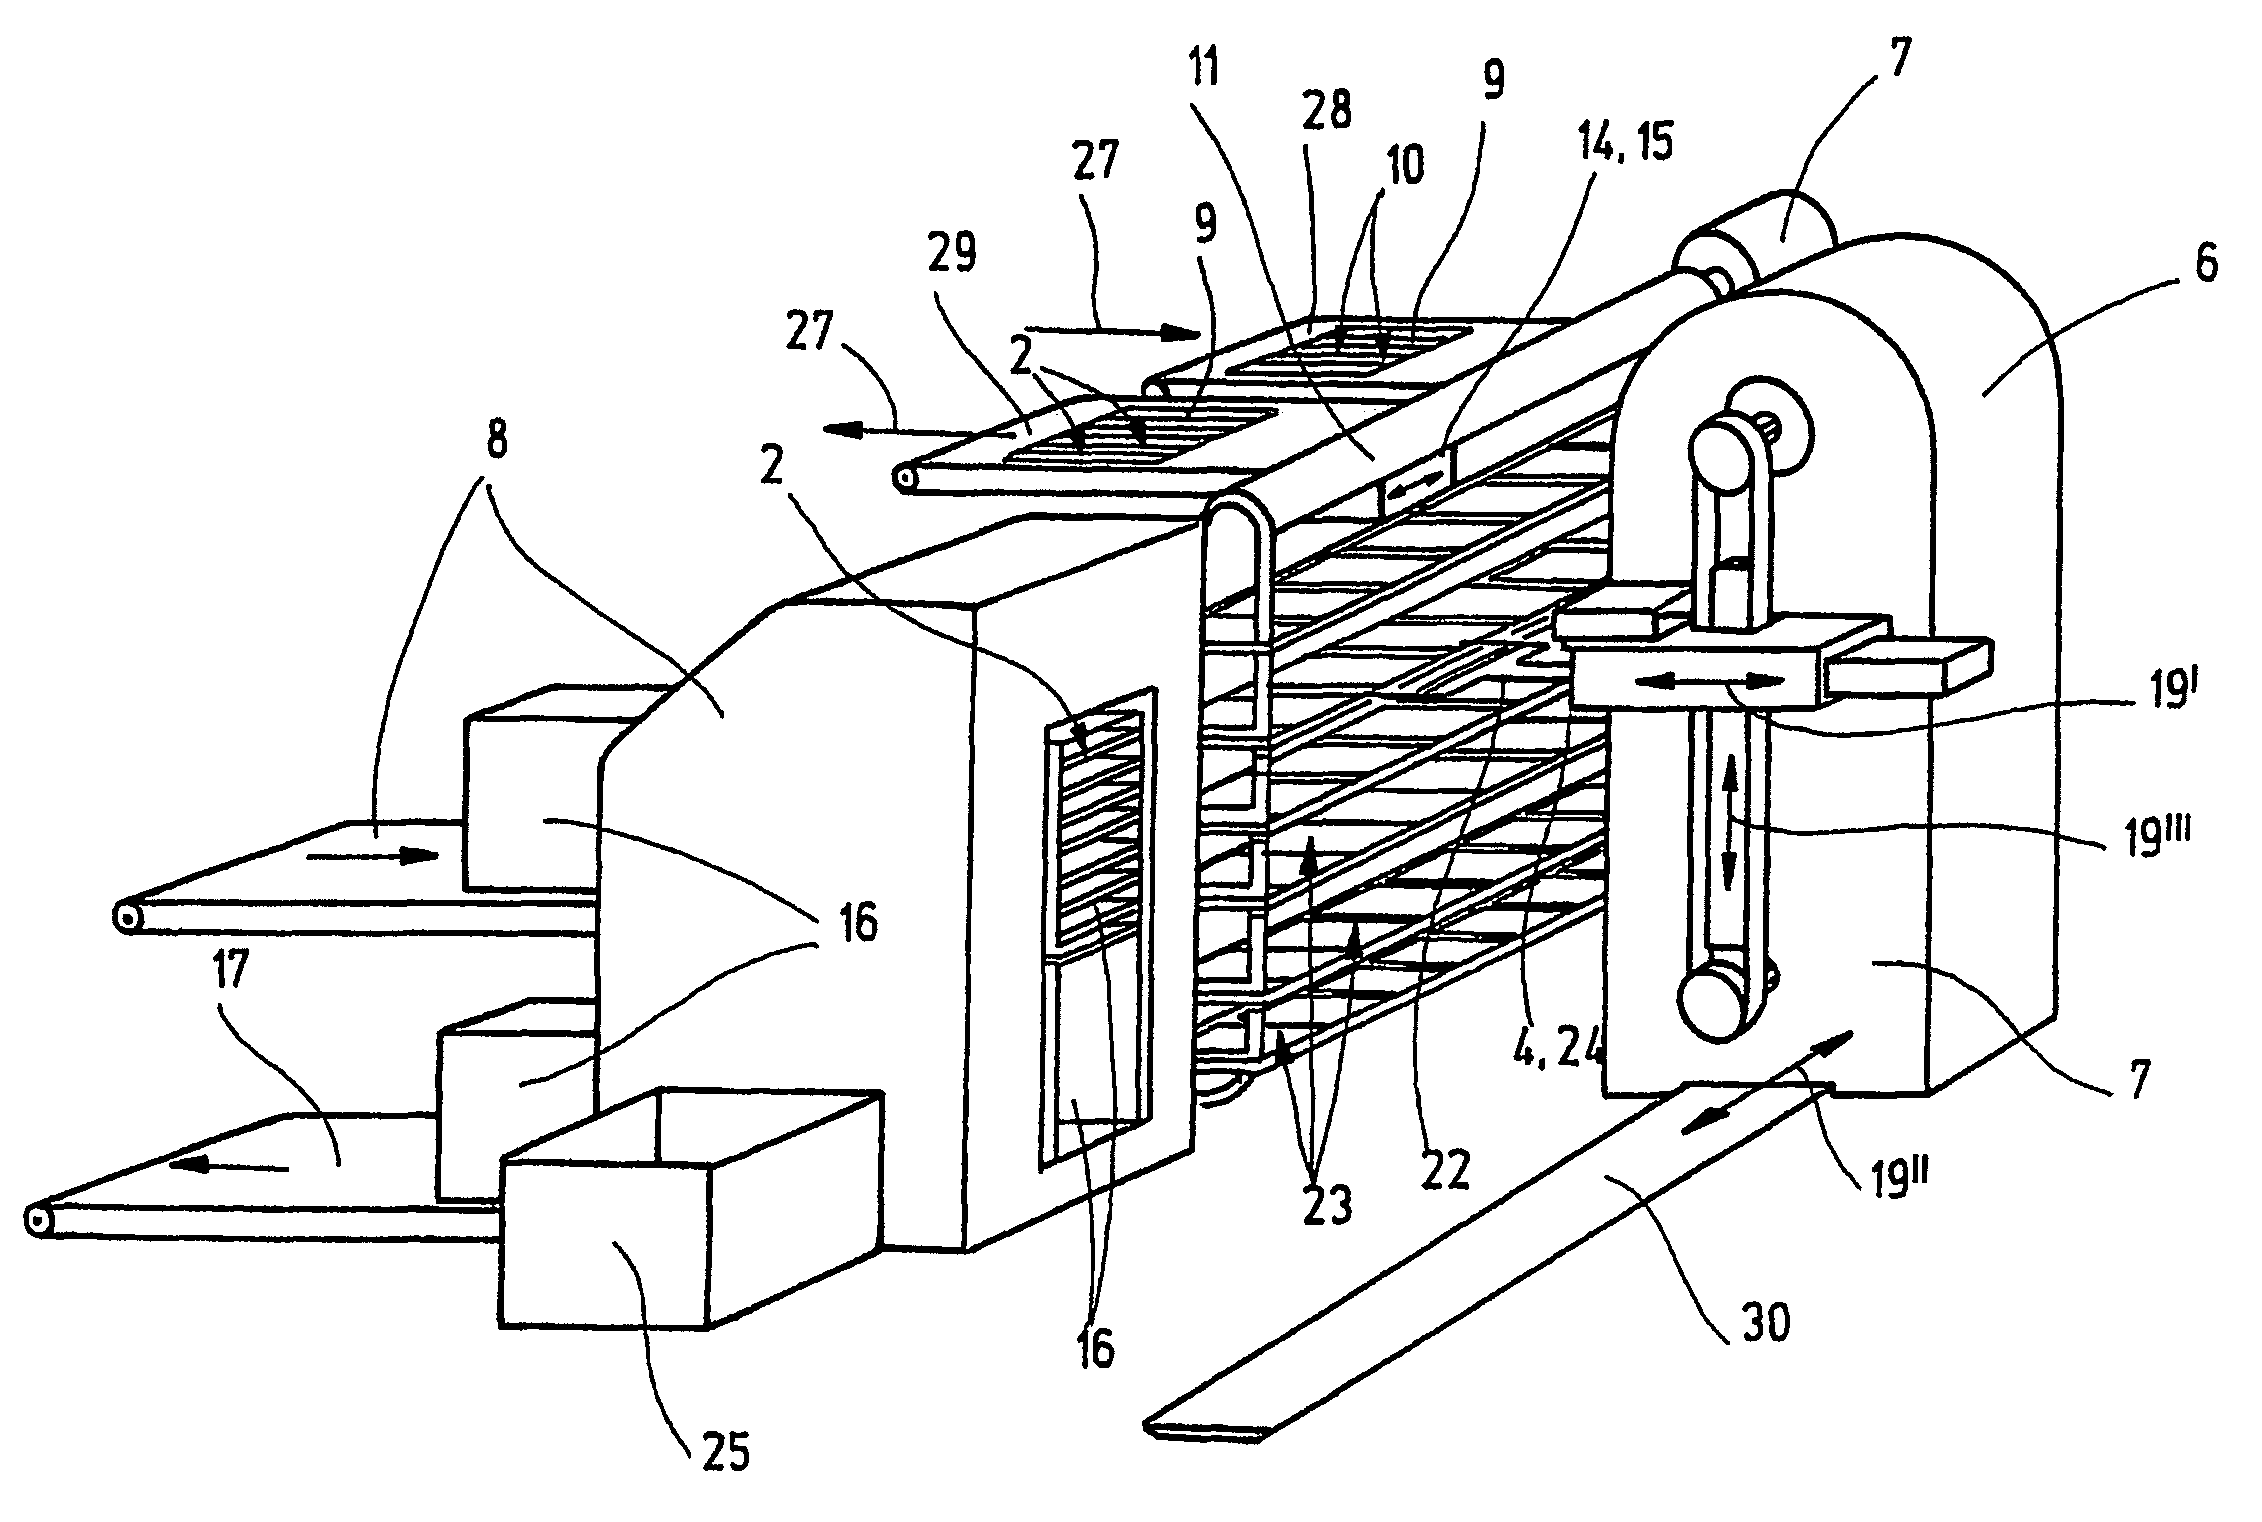 Apparatus for handling and classifying microtomized tissue samples